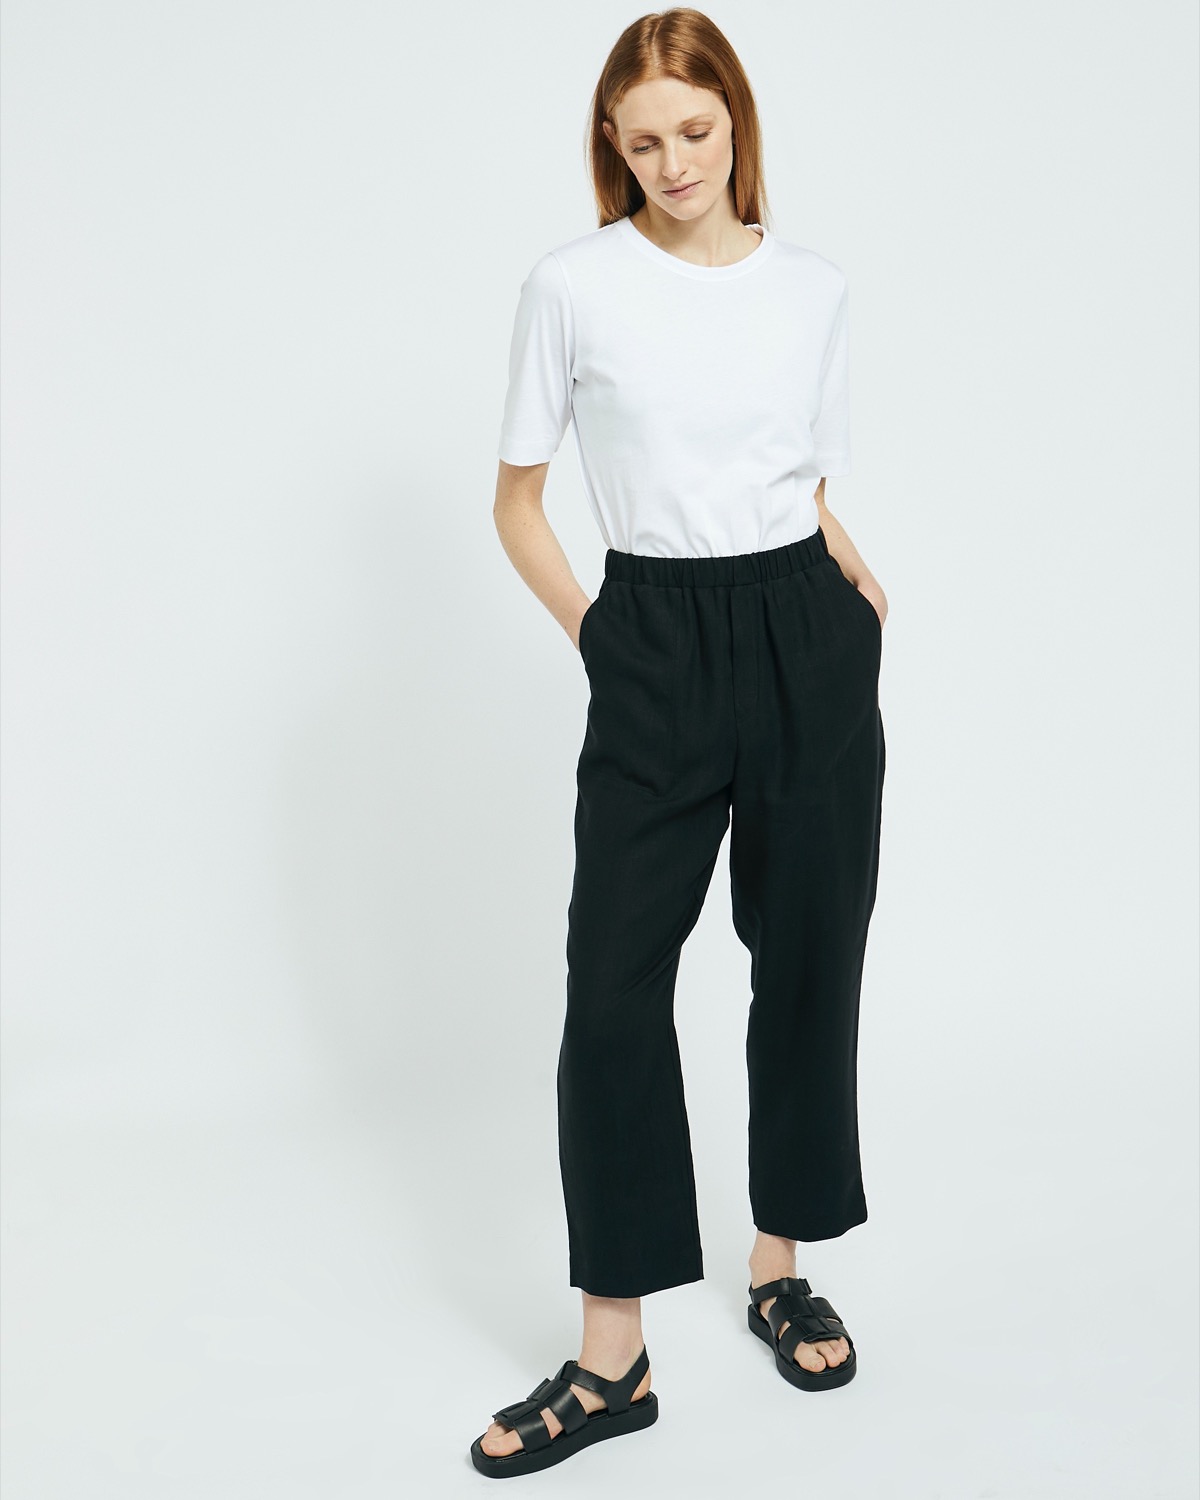 Summer Capris Pants for Women Elastic Waist Loose Capris Trousers Linen  Cropped Trousers Wide Leg High Waisted Pants Black at Amazon Women's  Clothing store